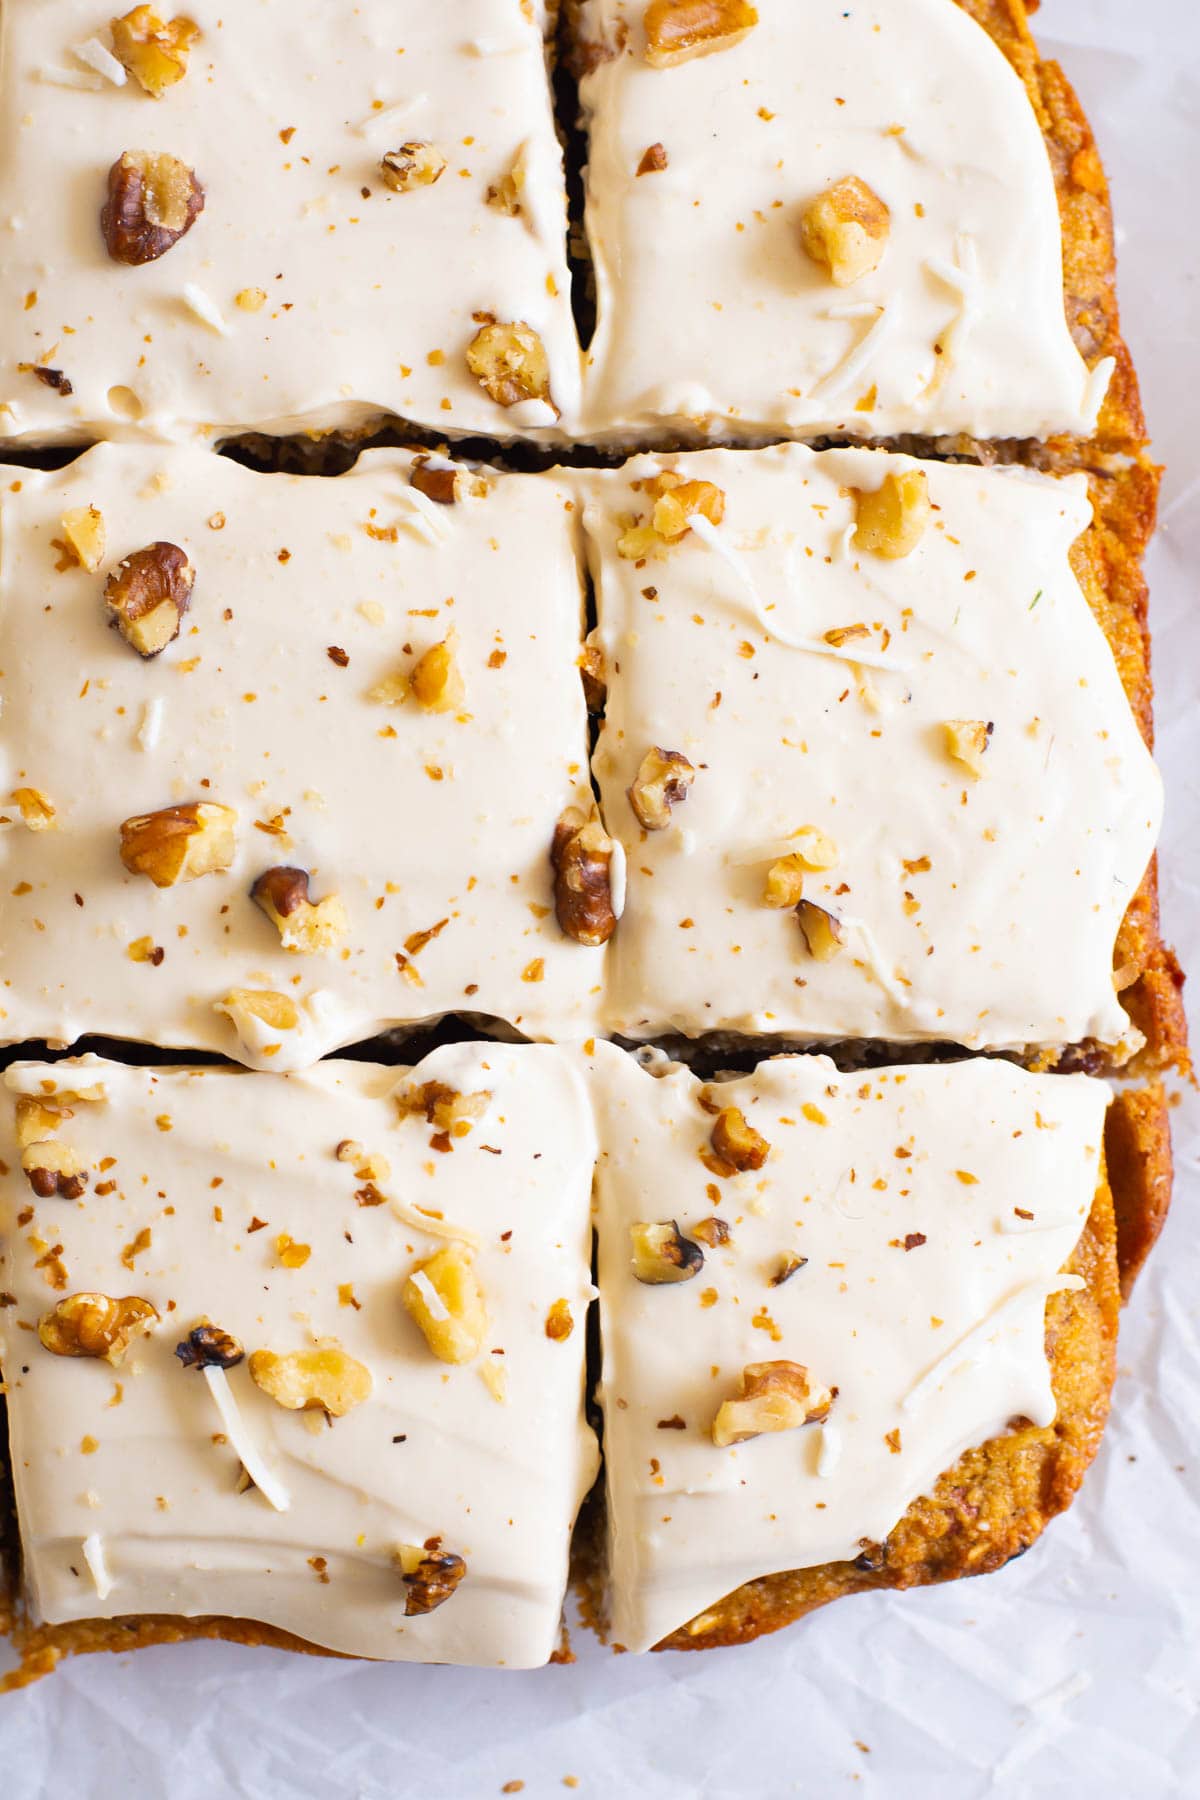 Healthy carrot cake bars iced and cut into square slices.